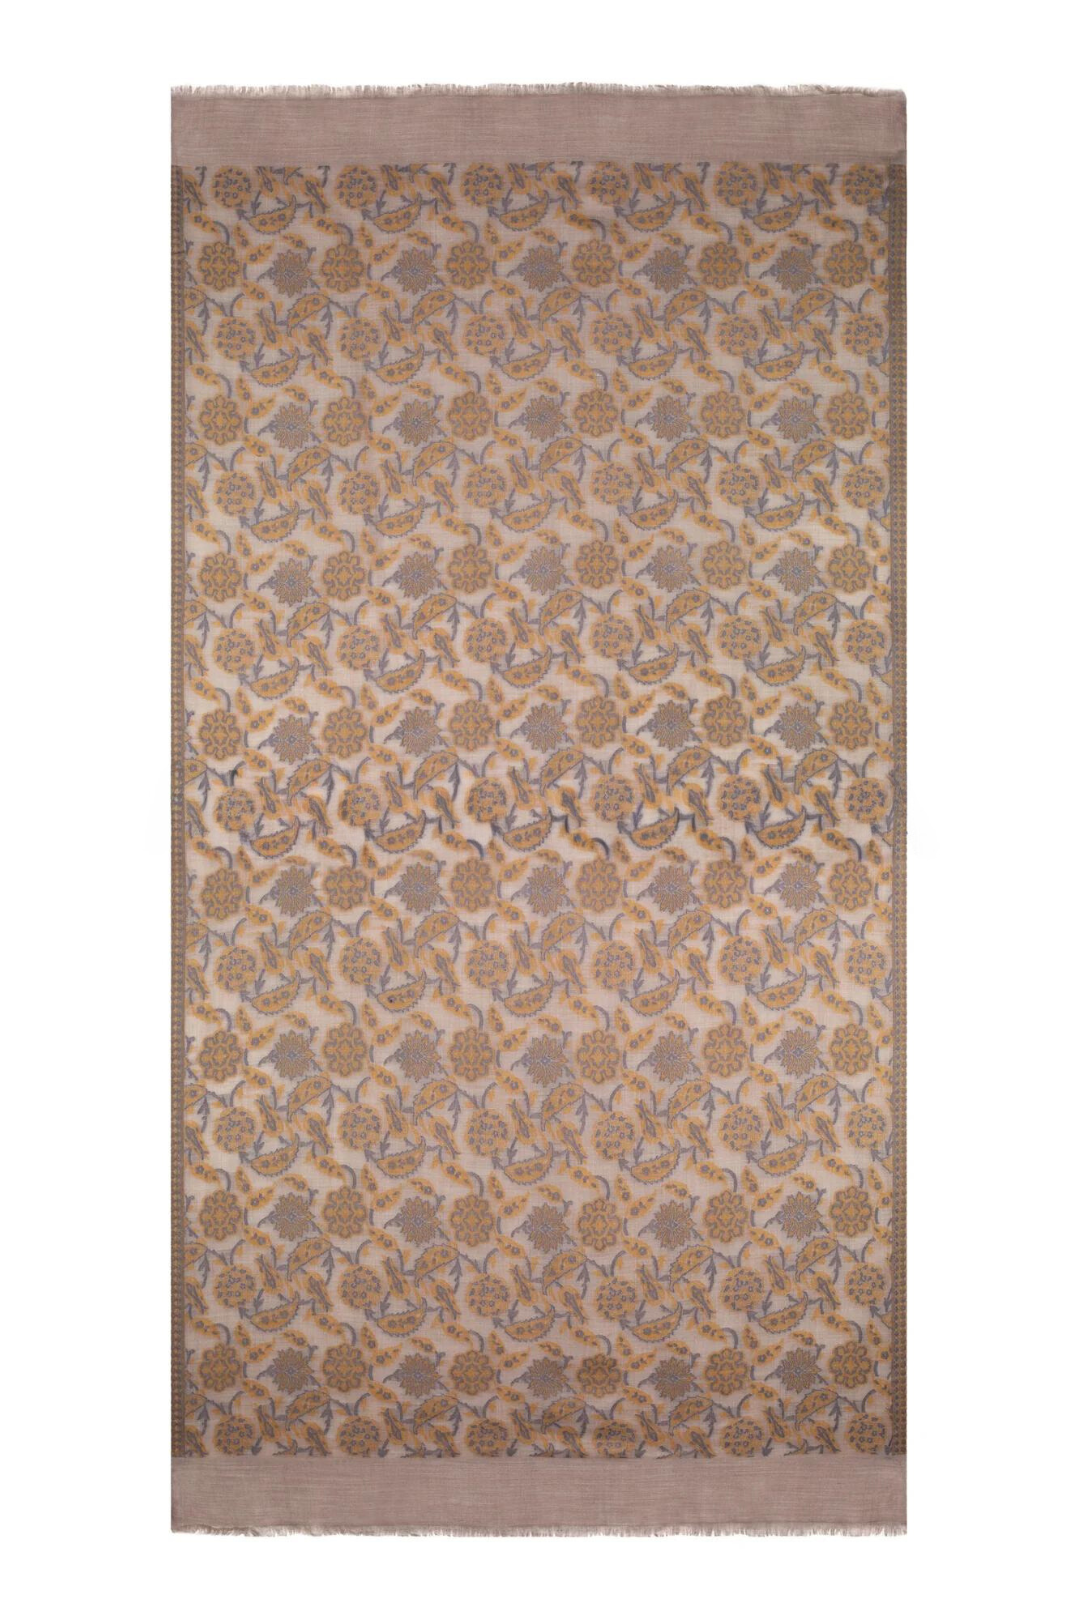 Abstract Floral Paisley Cashmere Pashmina Shawl - Mustard